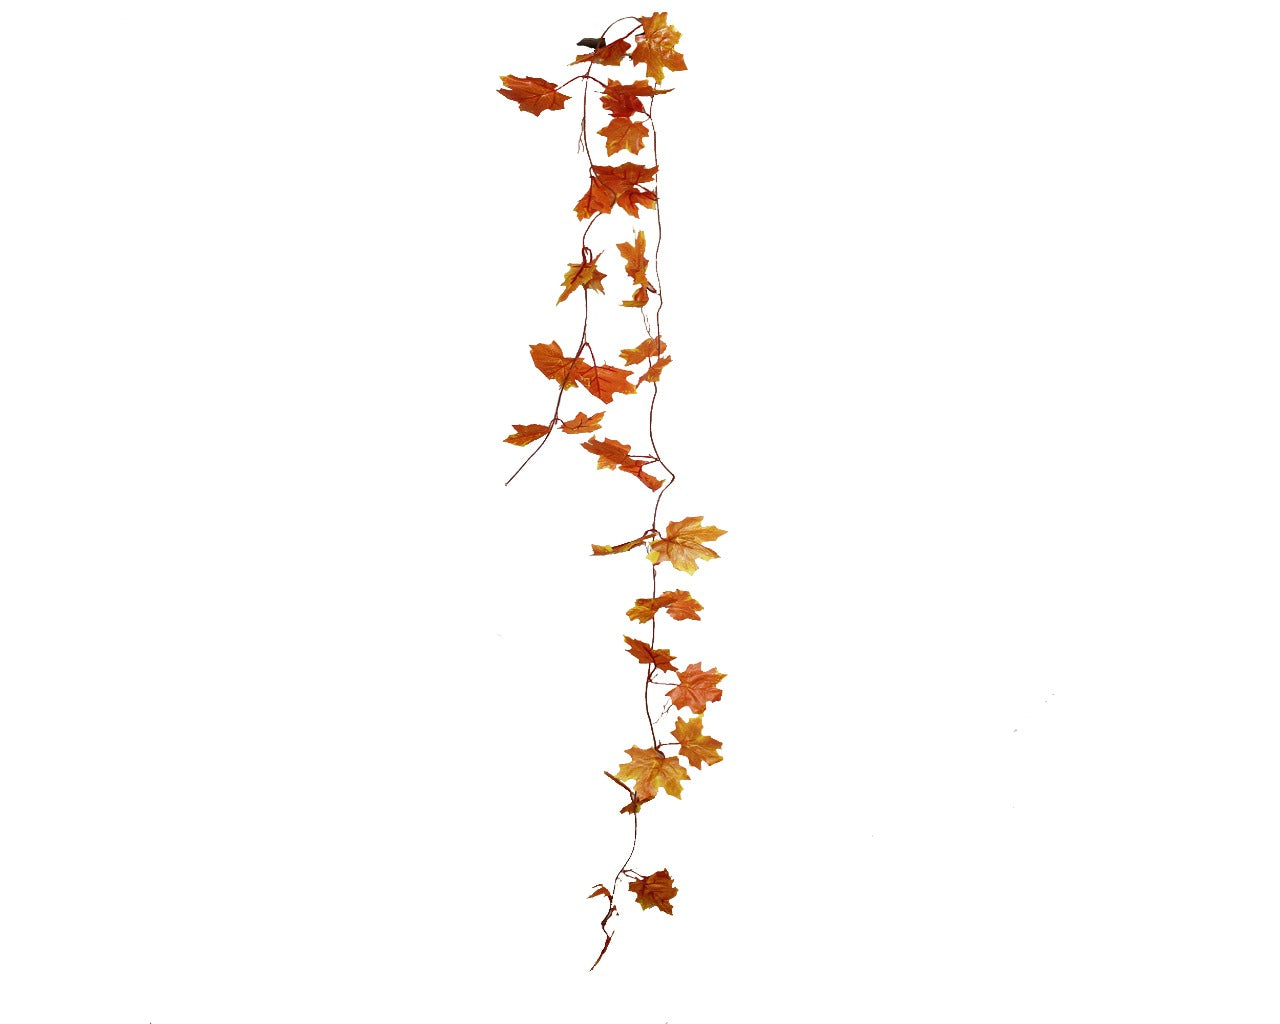 Pollination Beautiful Artificial Hanging Flower Maple Garland Creeper for Wall Hanging |Decoration |Home Decor (Pack of 4 strings, 7.5 feet)